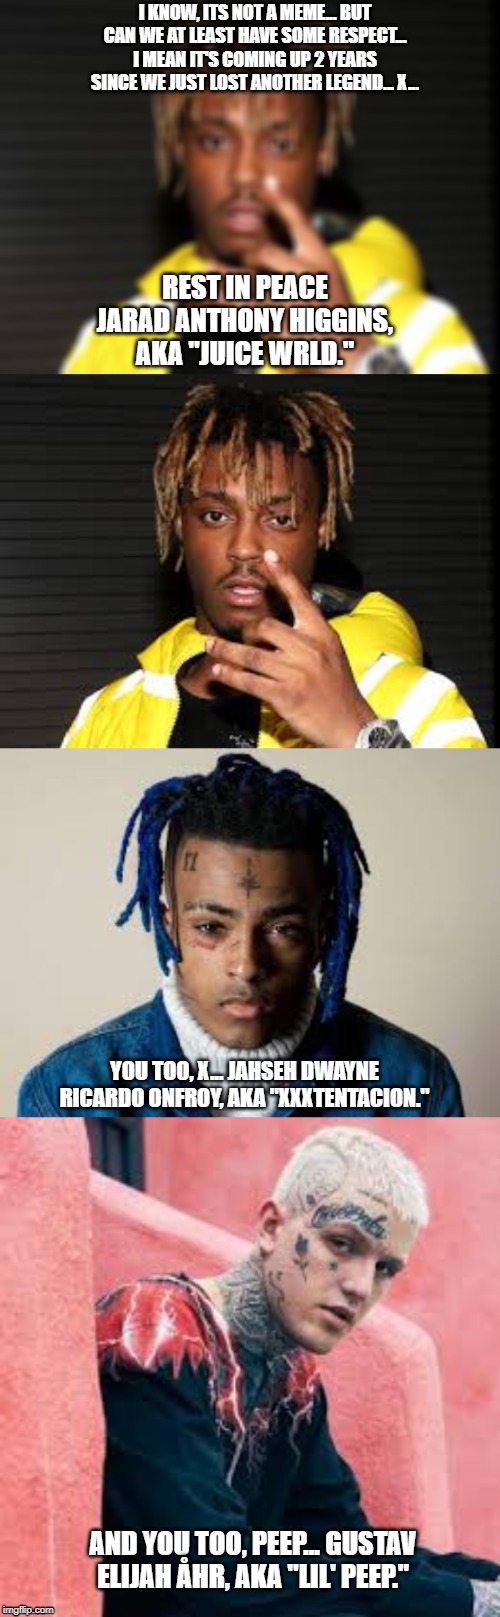 Memory... | I KNOW, ITS NOT A MEME... BUT CAN WE AT LEAST HAVE SOME RESPECT... I MEAN IT'S COMING UP 2 YEARS SINCE WE JUST LOST ANOTHER LEGEND... X... REST IN PEACE JARAD ANTHONY HIGGINS, AKA "JUICE WRLD."; YOU TOO, X... JAHSEH DWAYNE RICARDO ONFROY, AKA "XXXTENTACION."; AND YOU TOO, PEEP... GUSTAV ELIJAH ÅHR, AKA "LIL' PEEP." | image tagged in sad,heartbreak,rest in peace,respect,memory | made w/ Imgflip meme maker